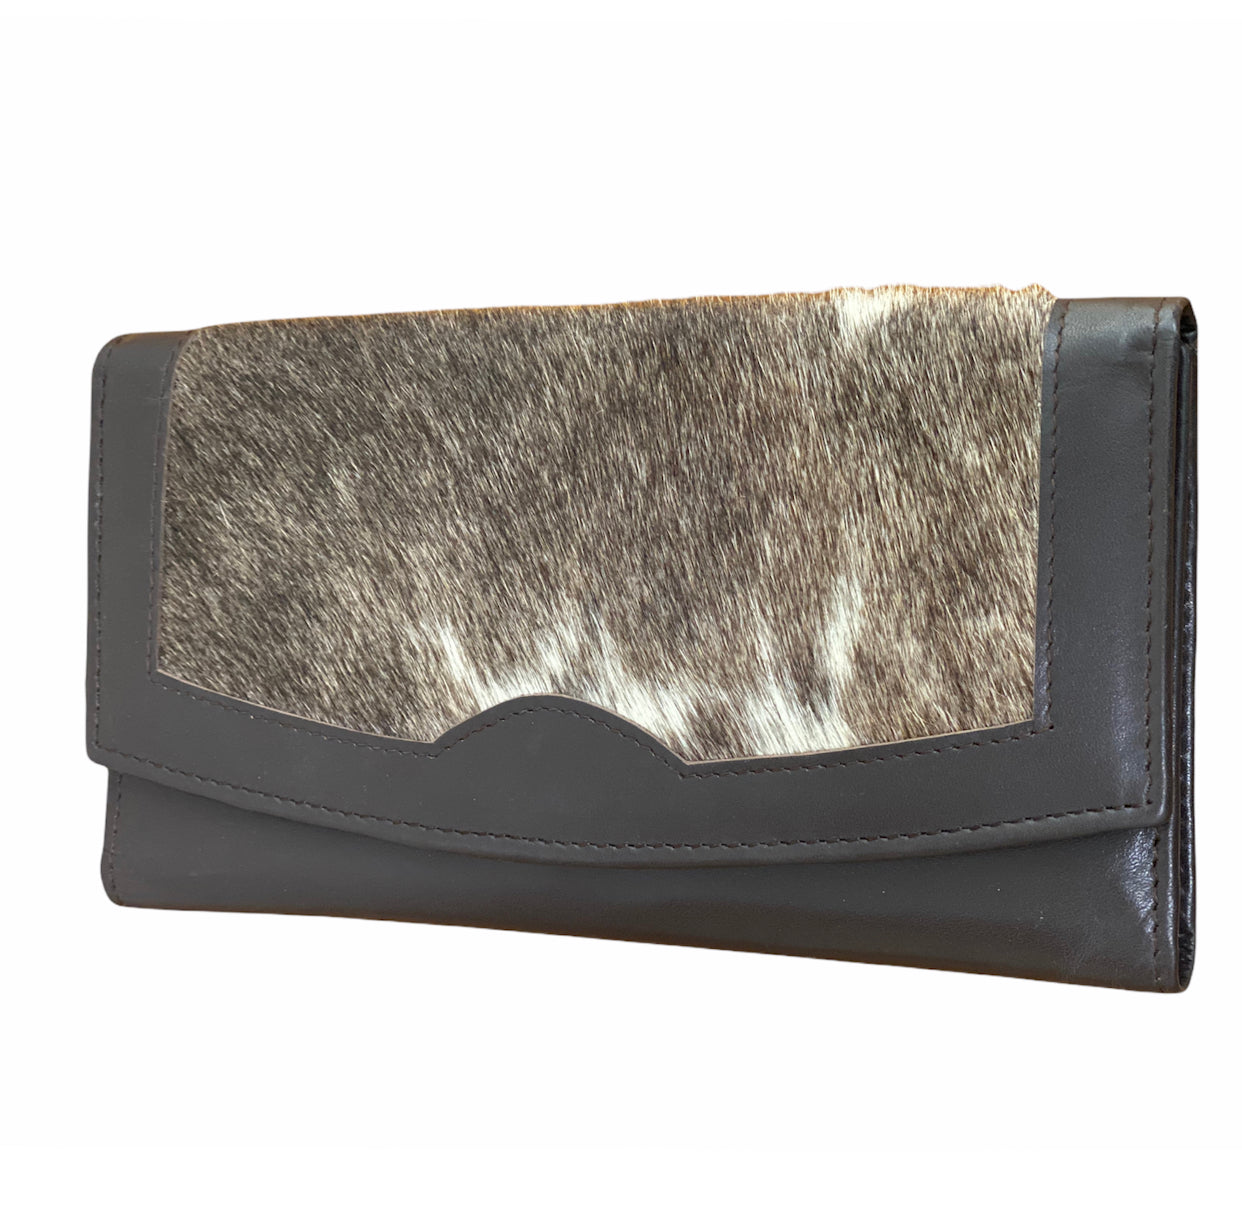 A7763 - Hair-On Collection Secretary Style Wallet